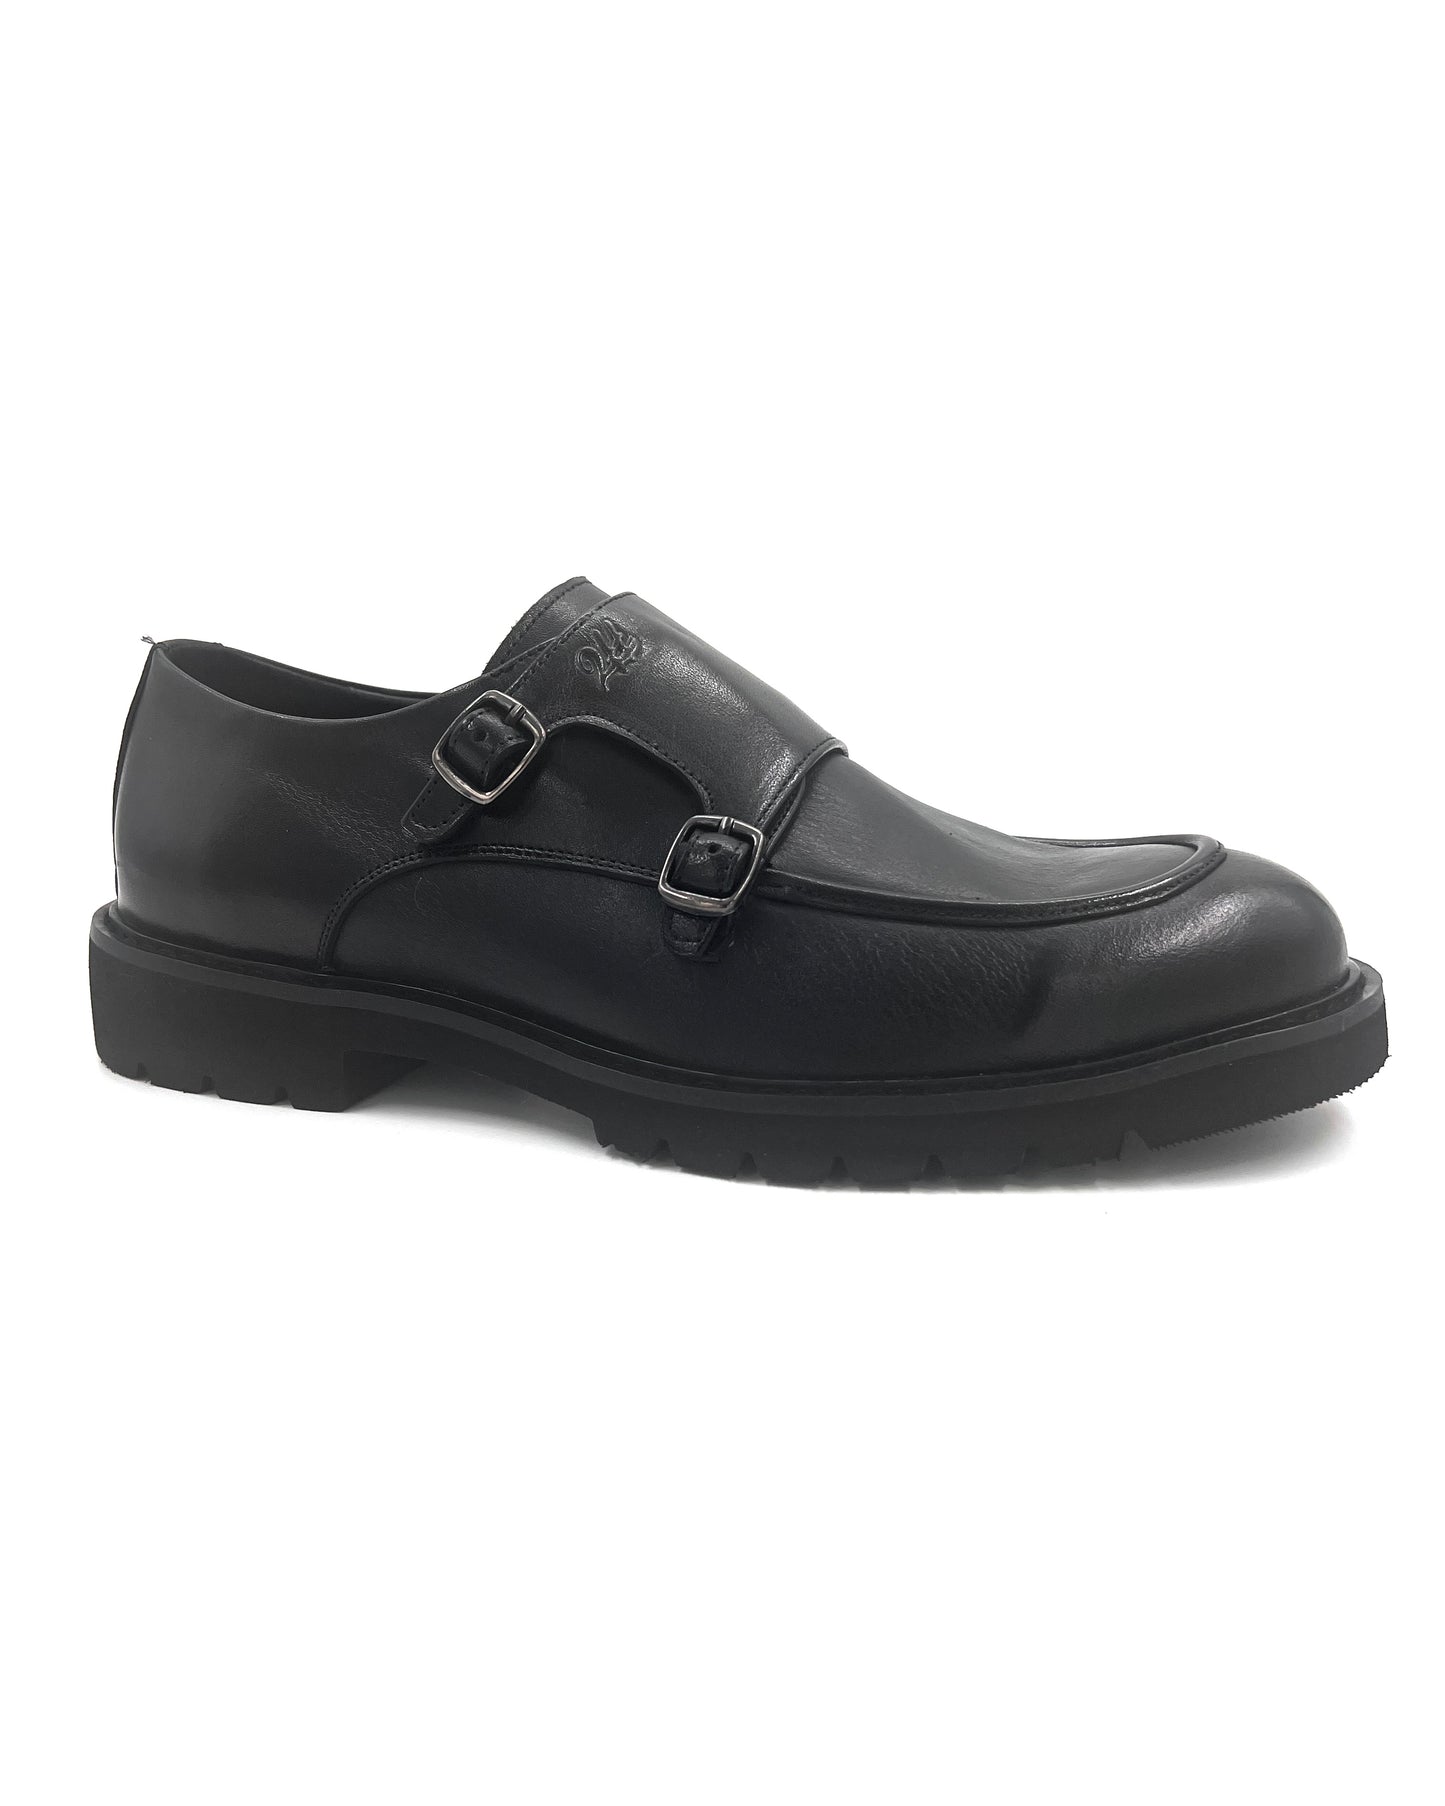 2H #007 Genuine Leather Black Classic Shoes